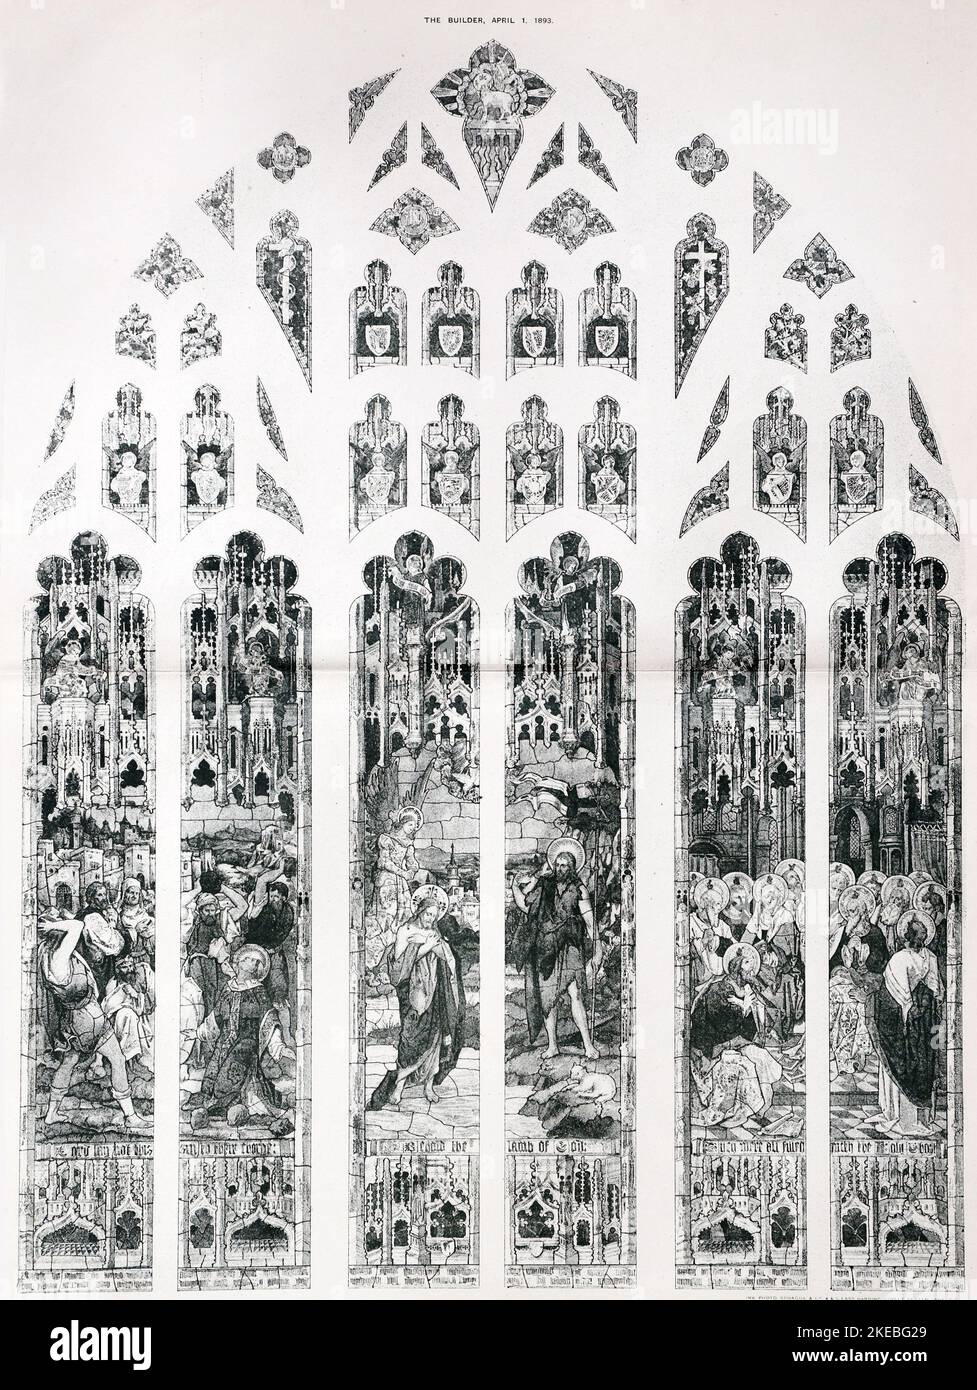 Photolithograph published in The Builder Vol 64 1st April 1893 of the stained glass window by Percy Bacon and Brothers installed in the west of the new baptistry of Manchester Cathedral in 1893. The window theme is Baptism by Blood, Water and Fire and is illustrated by the martyrdom of St. Stephen, the baptism of Christ, and the descent of the Holy Ghost at Pentecost. The works were carried out under the supervision of the Diocesan Architect Joseph Stretch Crowther (1820 - 1893). The window was destroyed in a German bombing raid in December 1942 during World War 2. Stock Photo